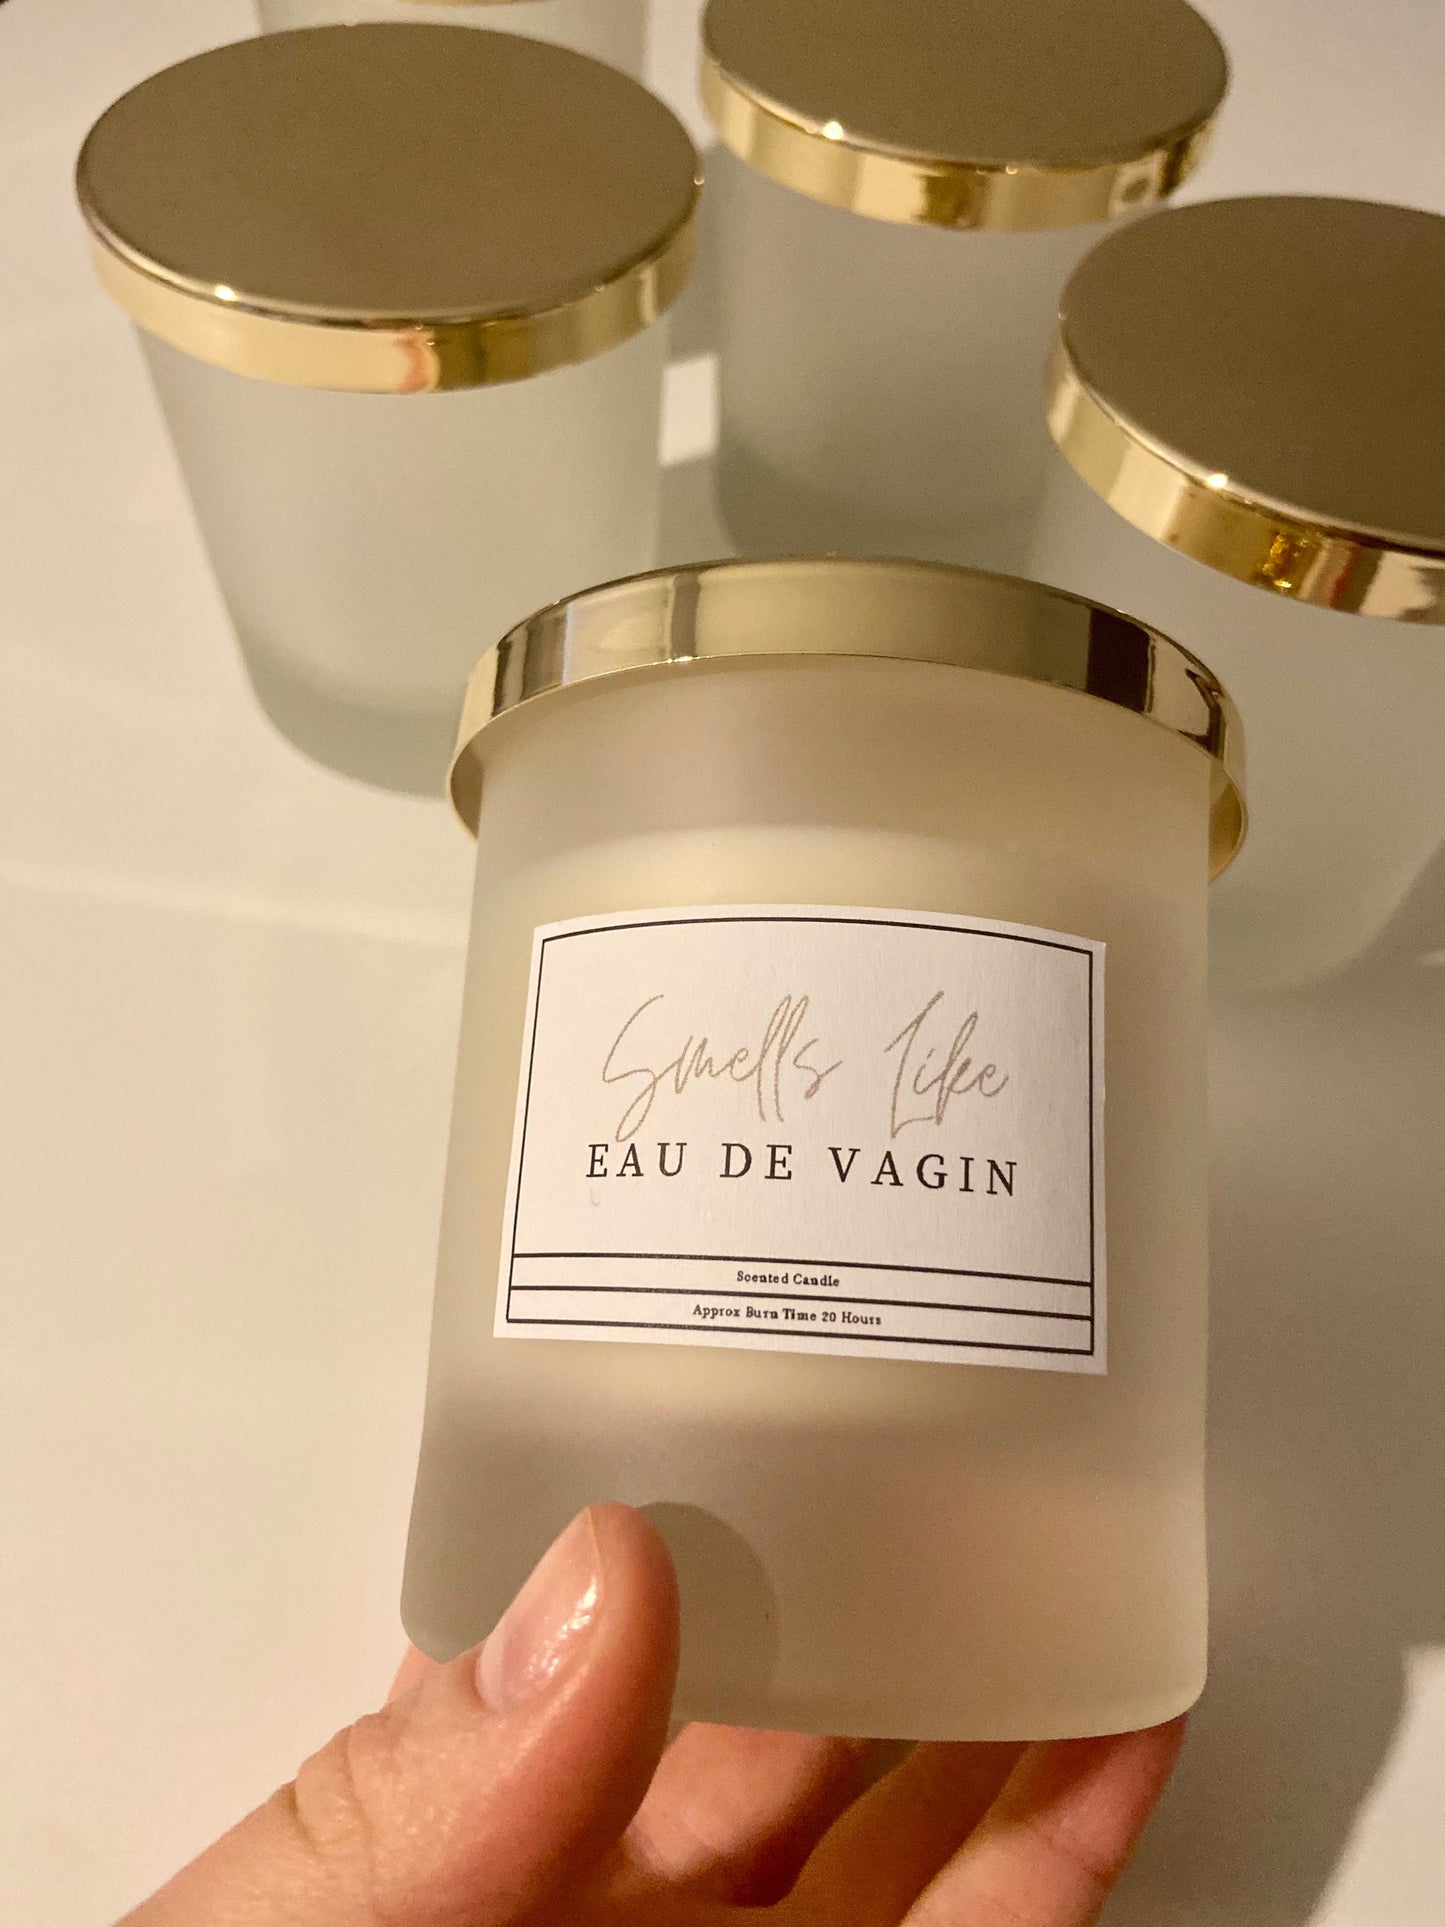 Smells Like Eau De Vagin Candle / Funny Candles / Funny Gifts/ Birthday Gifts